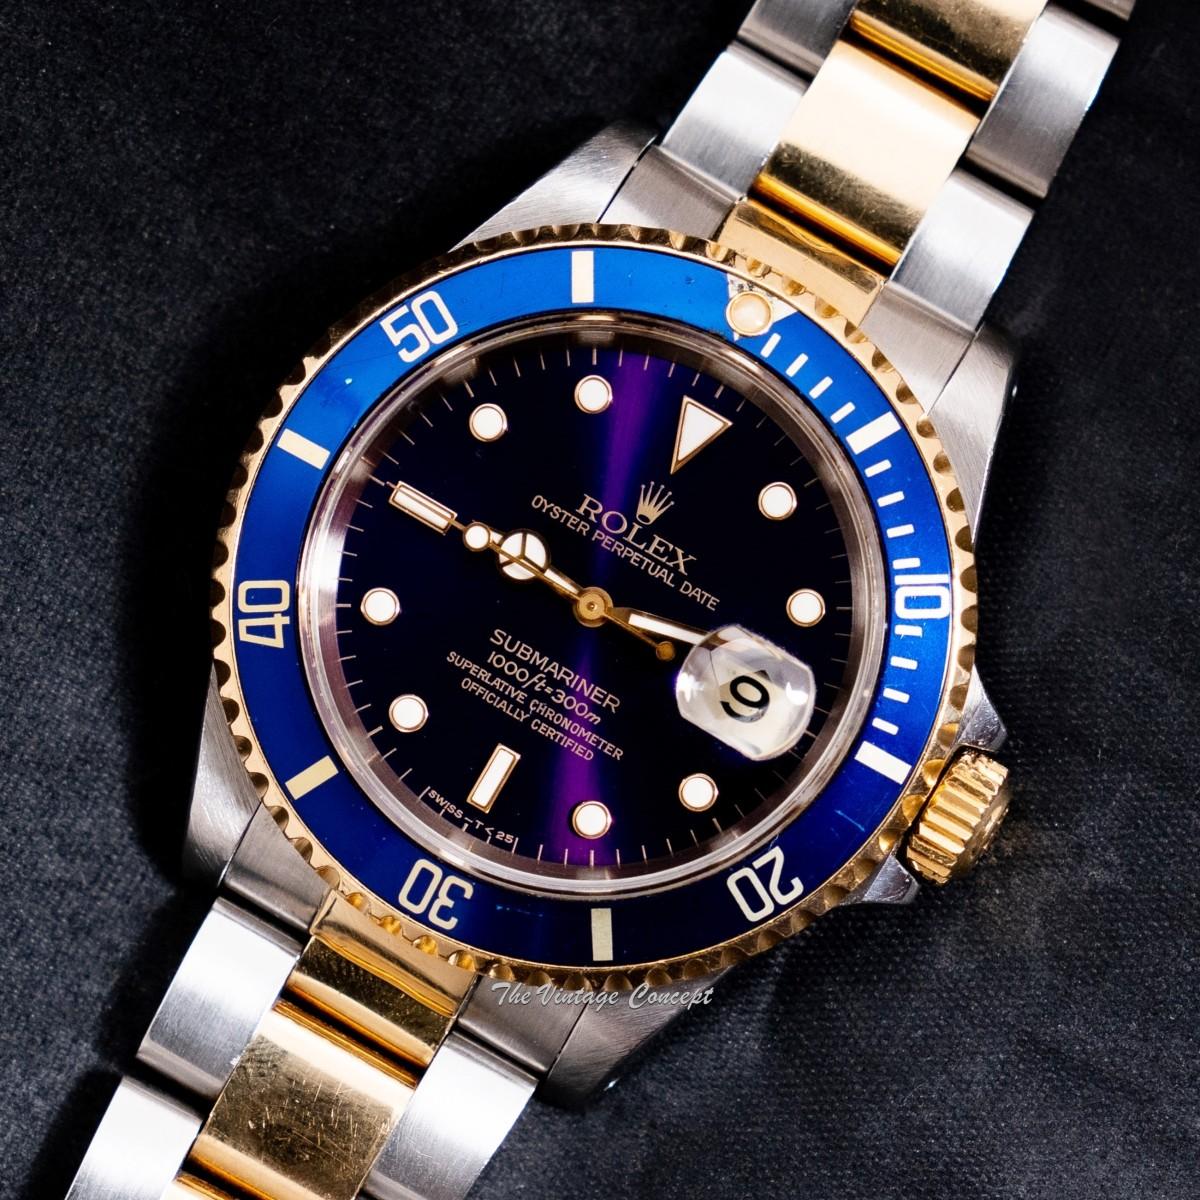 Rolex Submariner Yellow Gold & Steel Two-Tone Blue Purple Dial 16613 (SOLD)